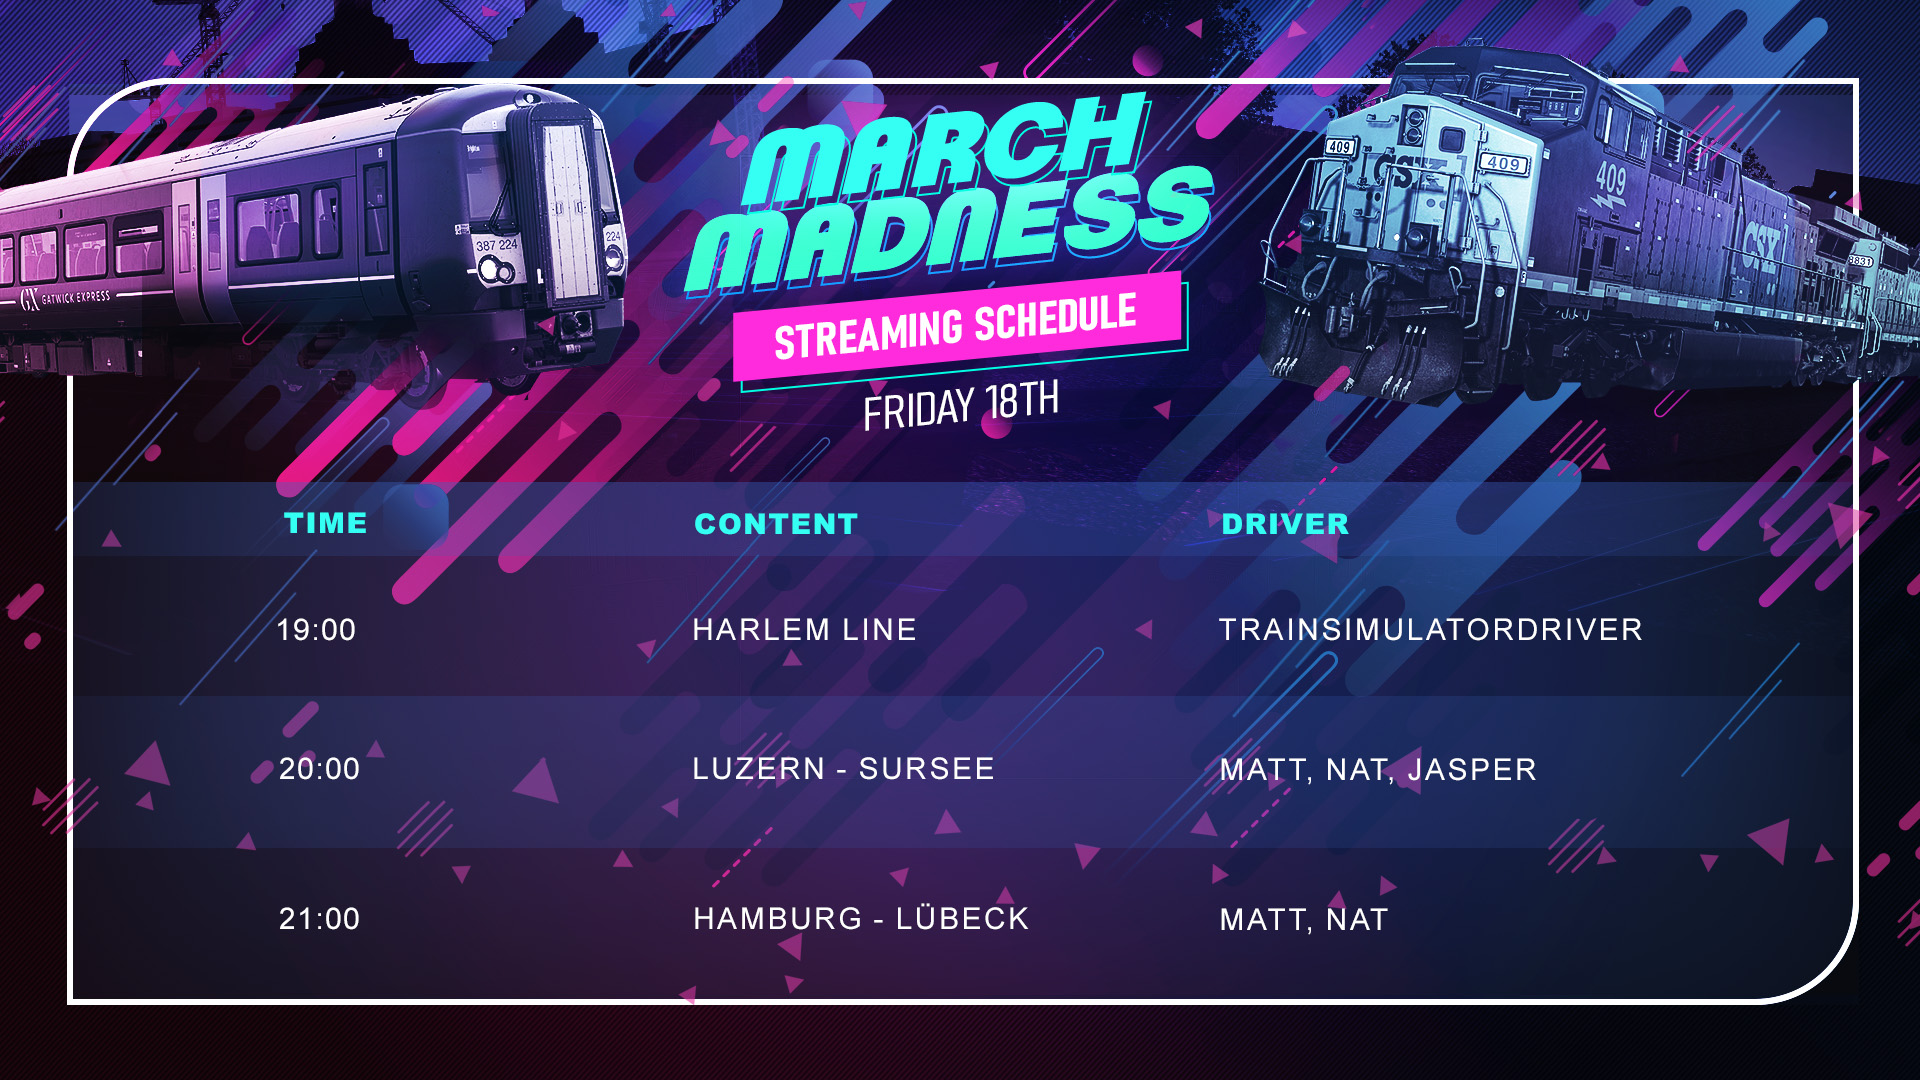 March_Madness_Streaming_Schedule2.jpg